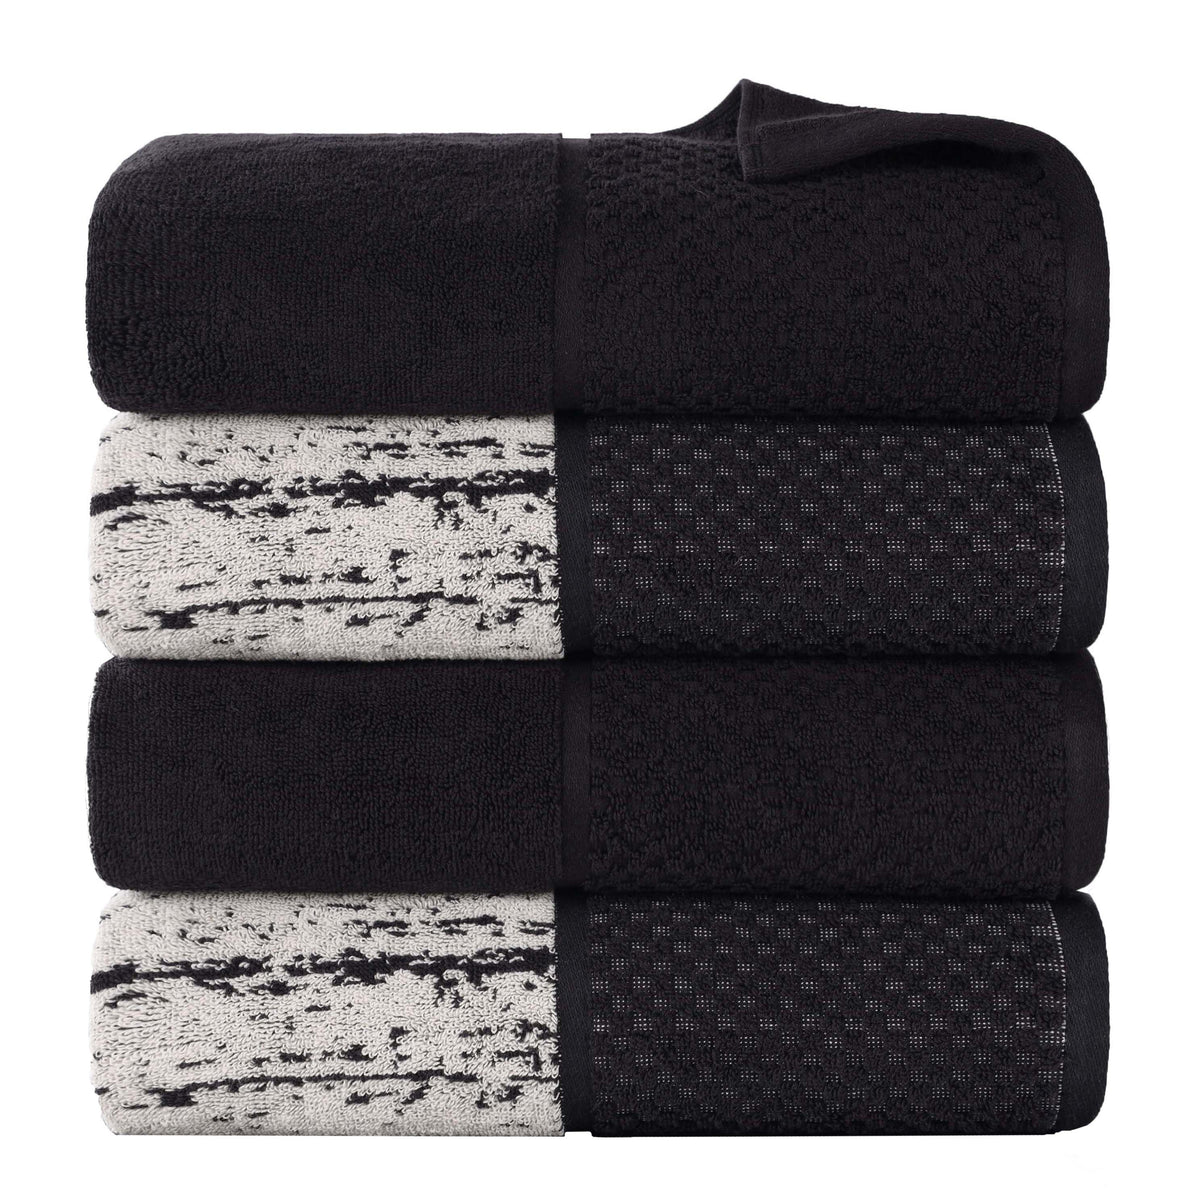 Lodie Cotton Jacquard Solid and Two-Toned Bath Towel Set of 4 - Black-Ivory